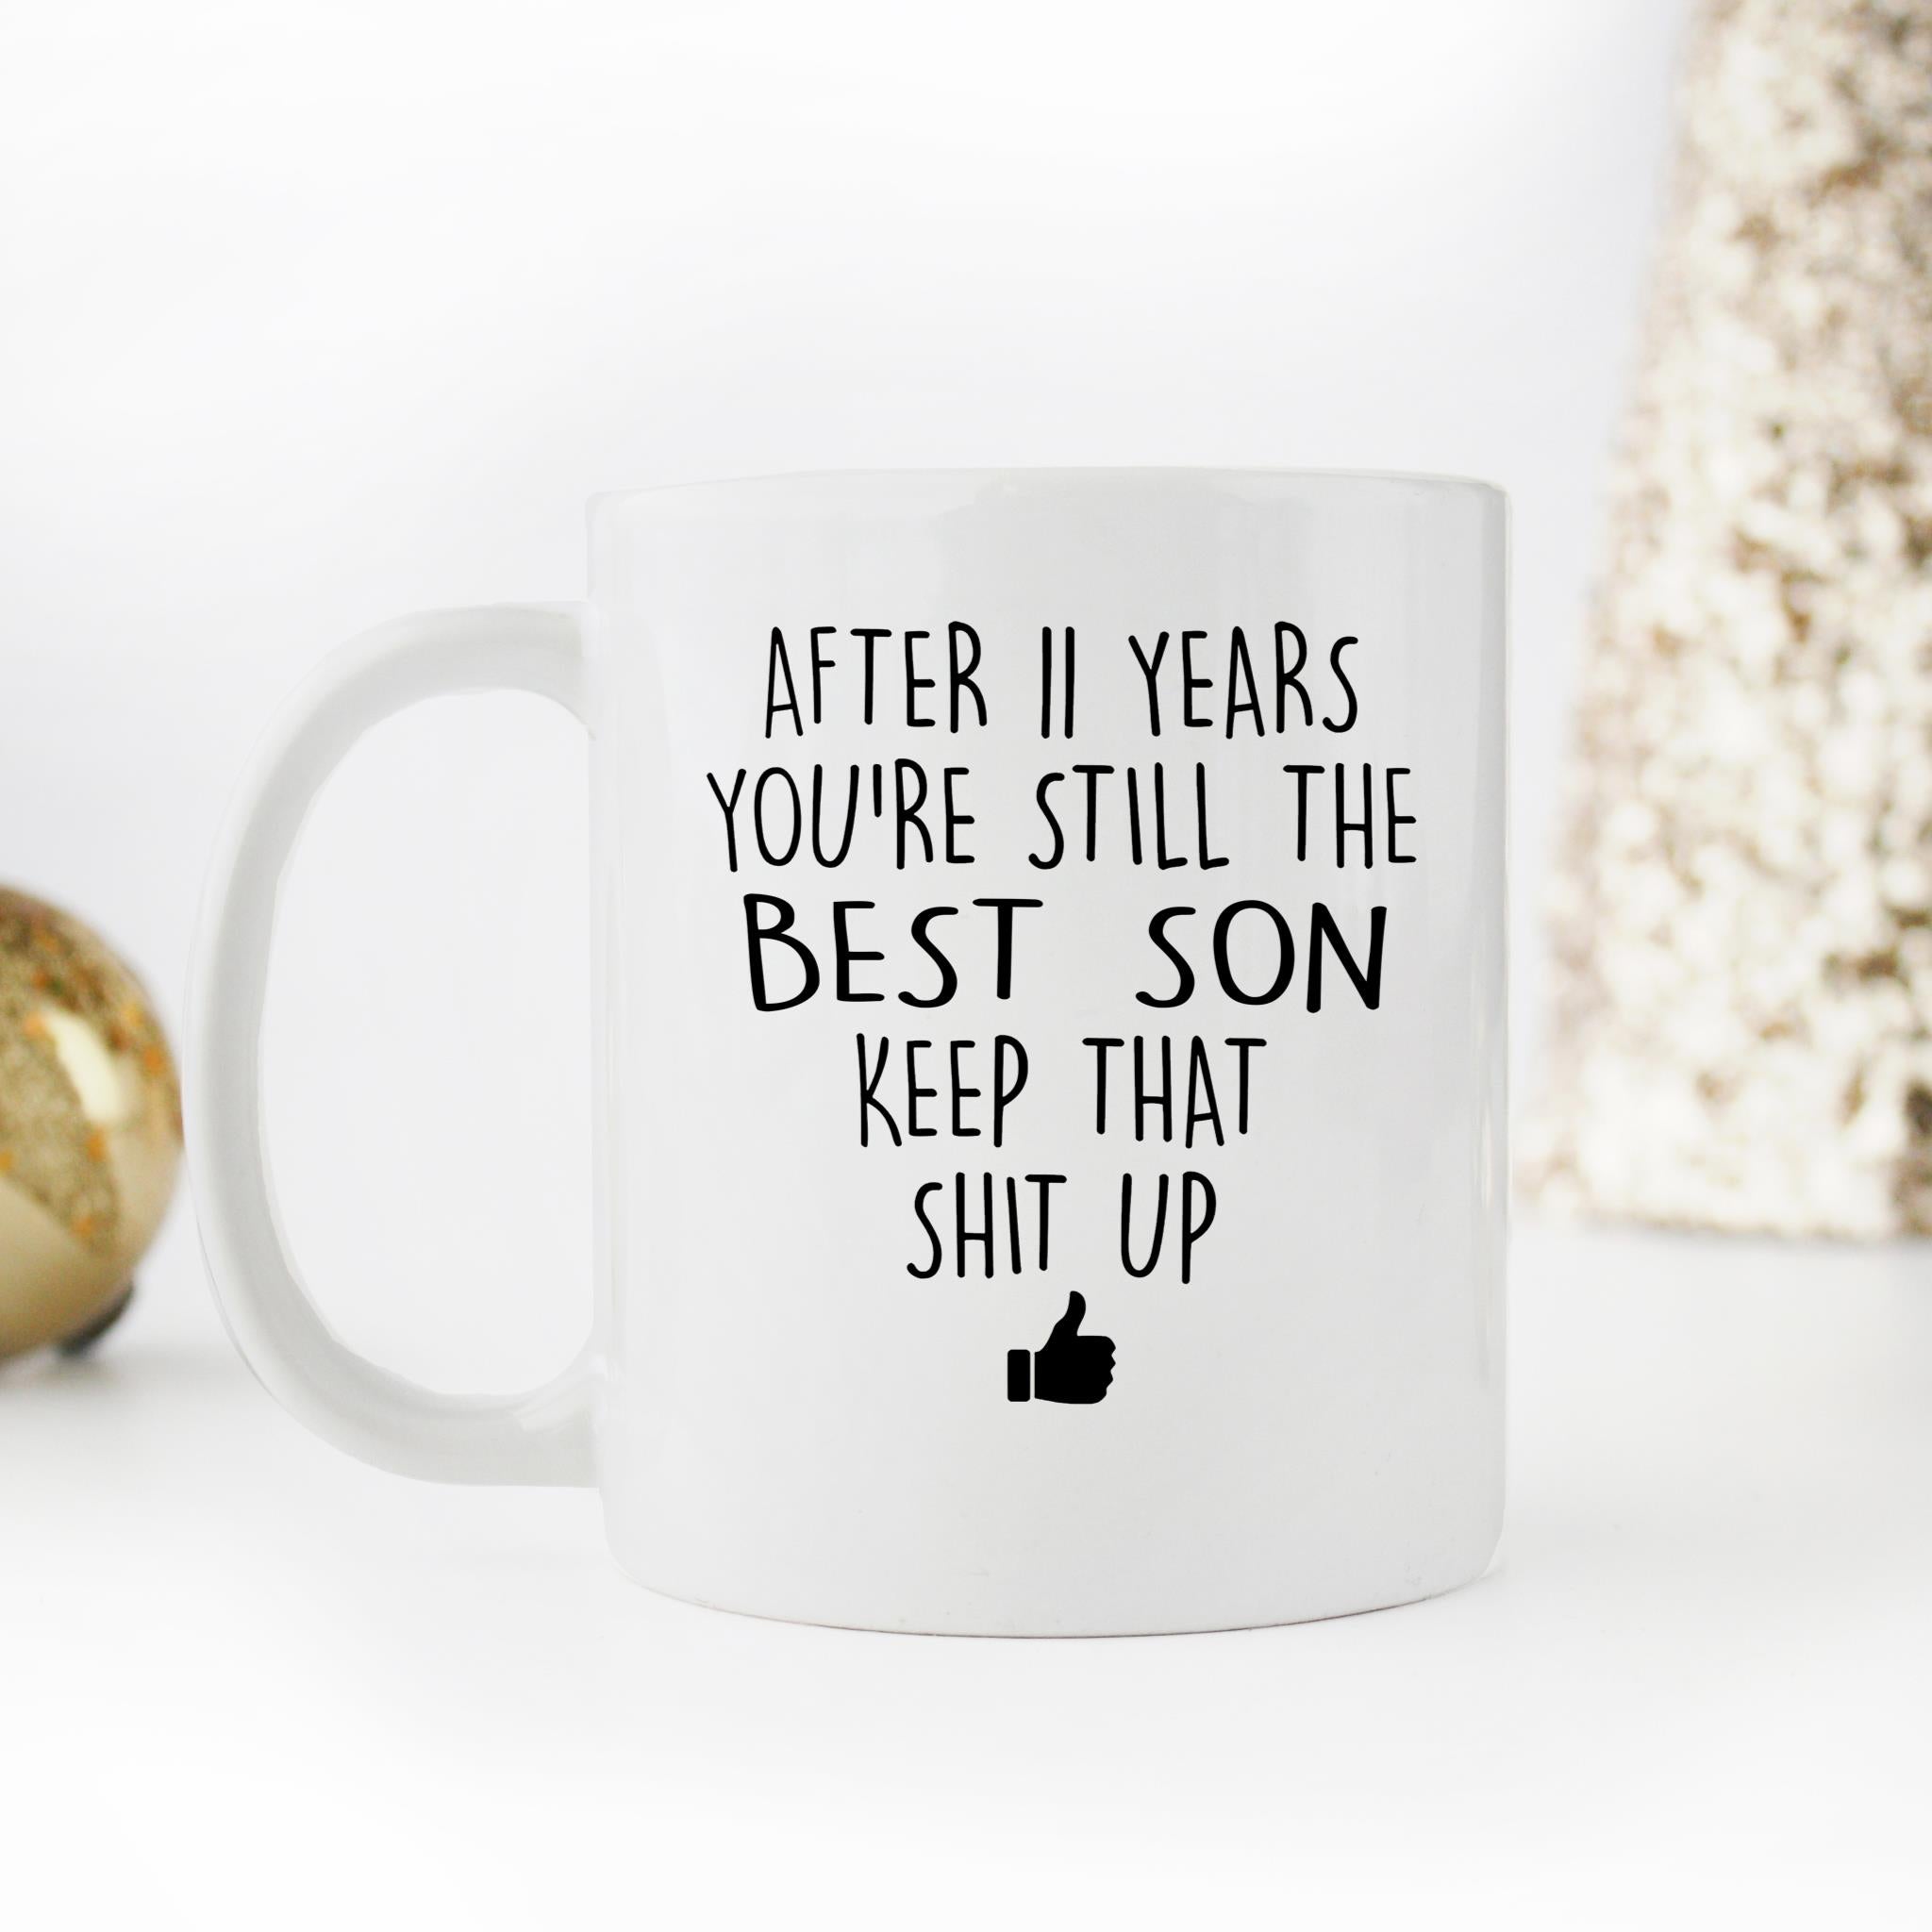 Skitongifts Funny Ceramic Novelty Coffee Mug After Custom Years You're Still The Best Son Keep That Shit Up P6k7ans